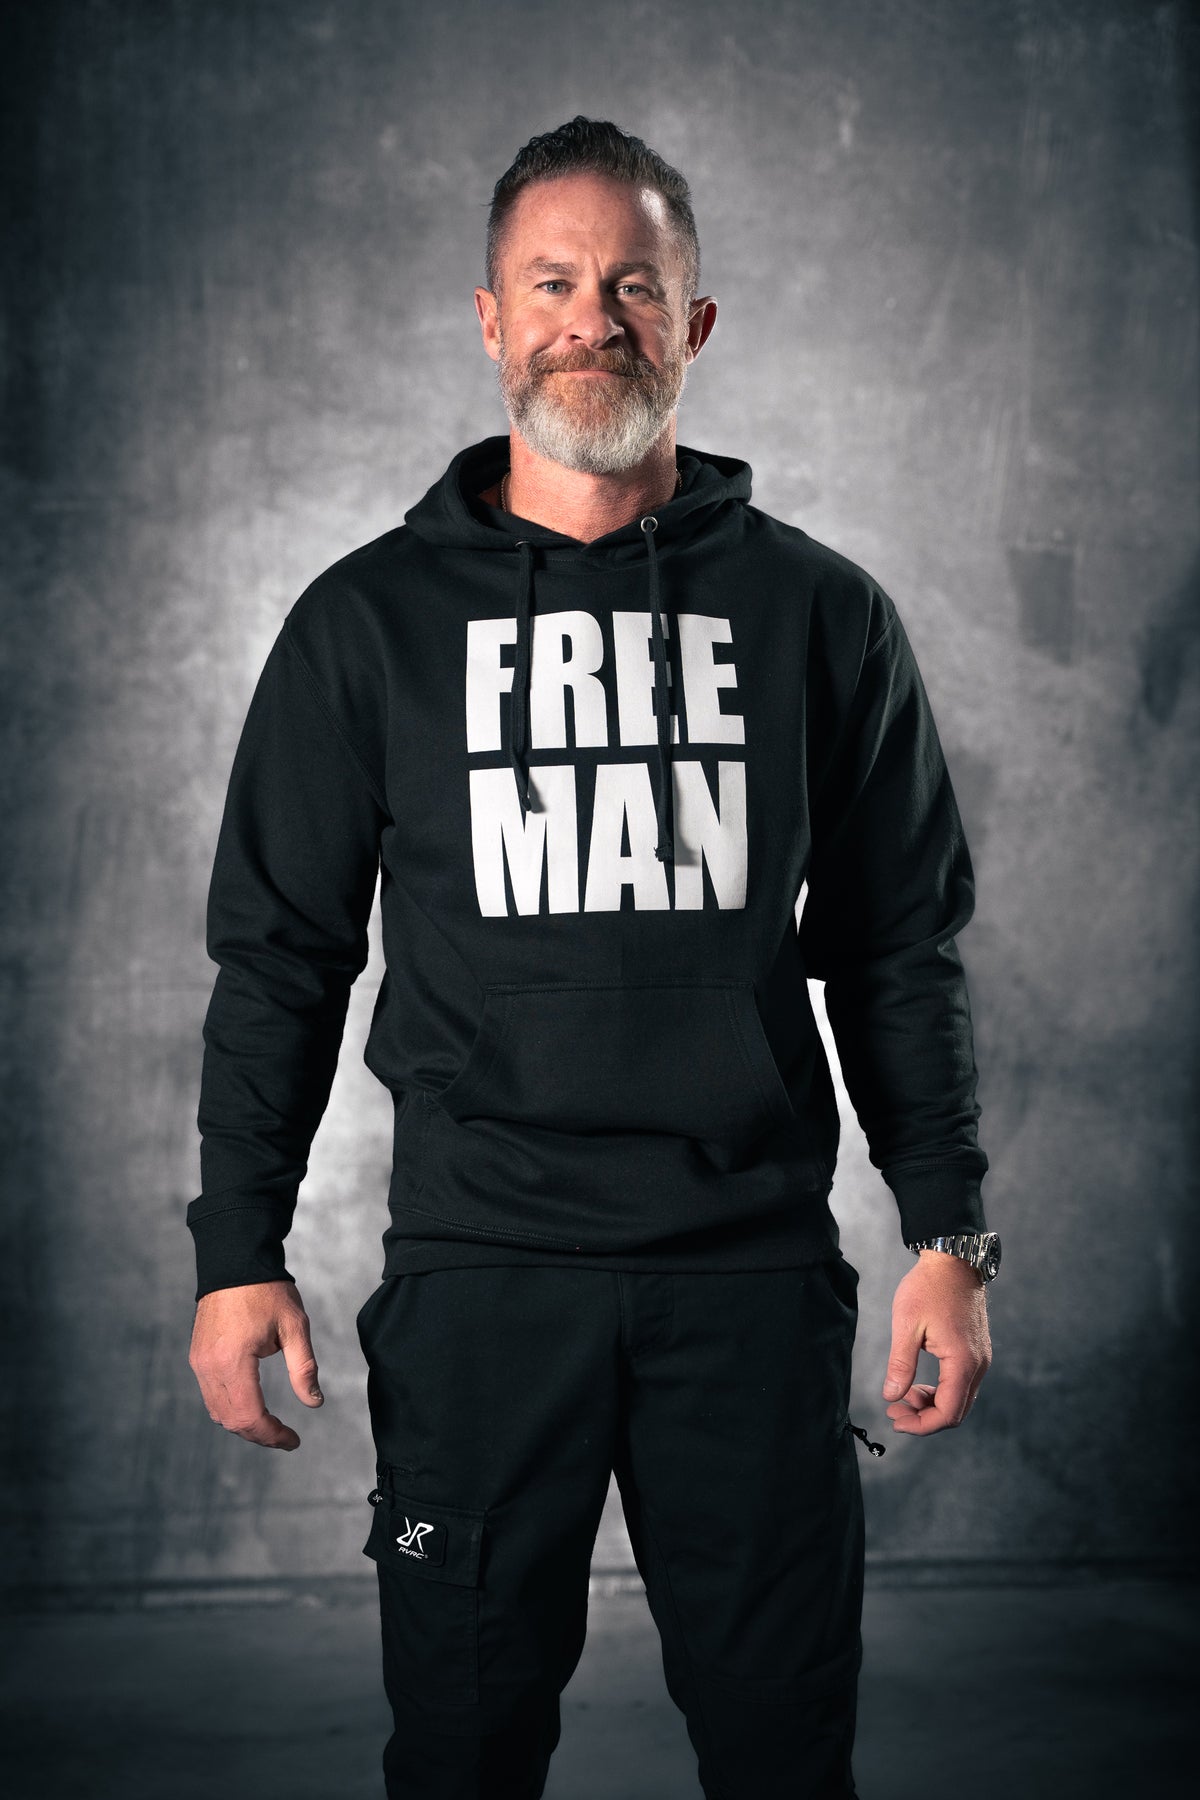 FREE MAN Unisex Pullover Hoodie - Lions Not Sheep ®